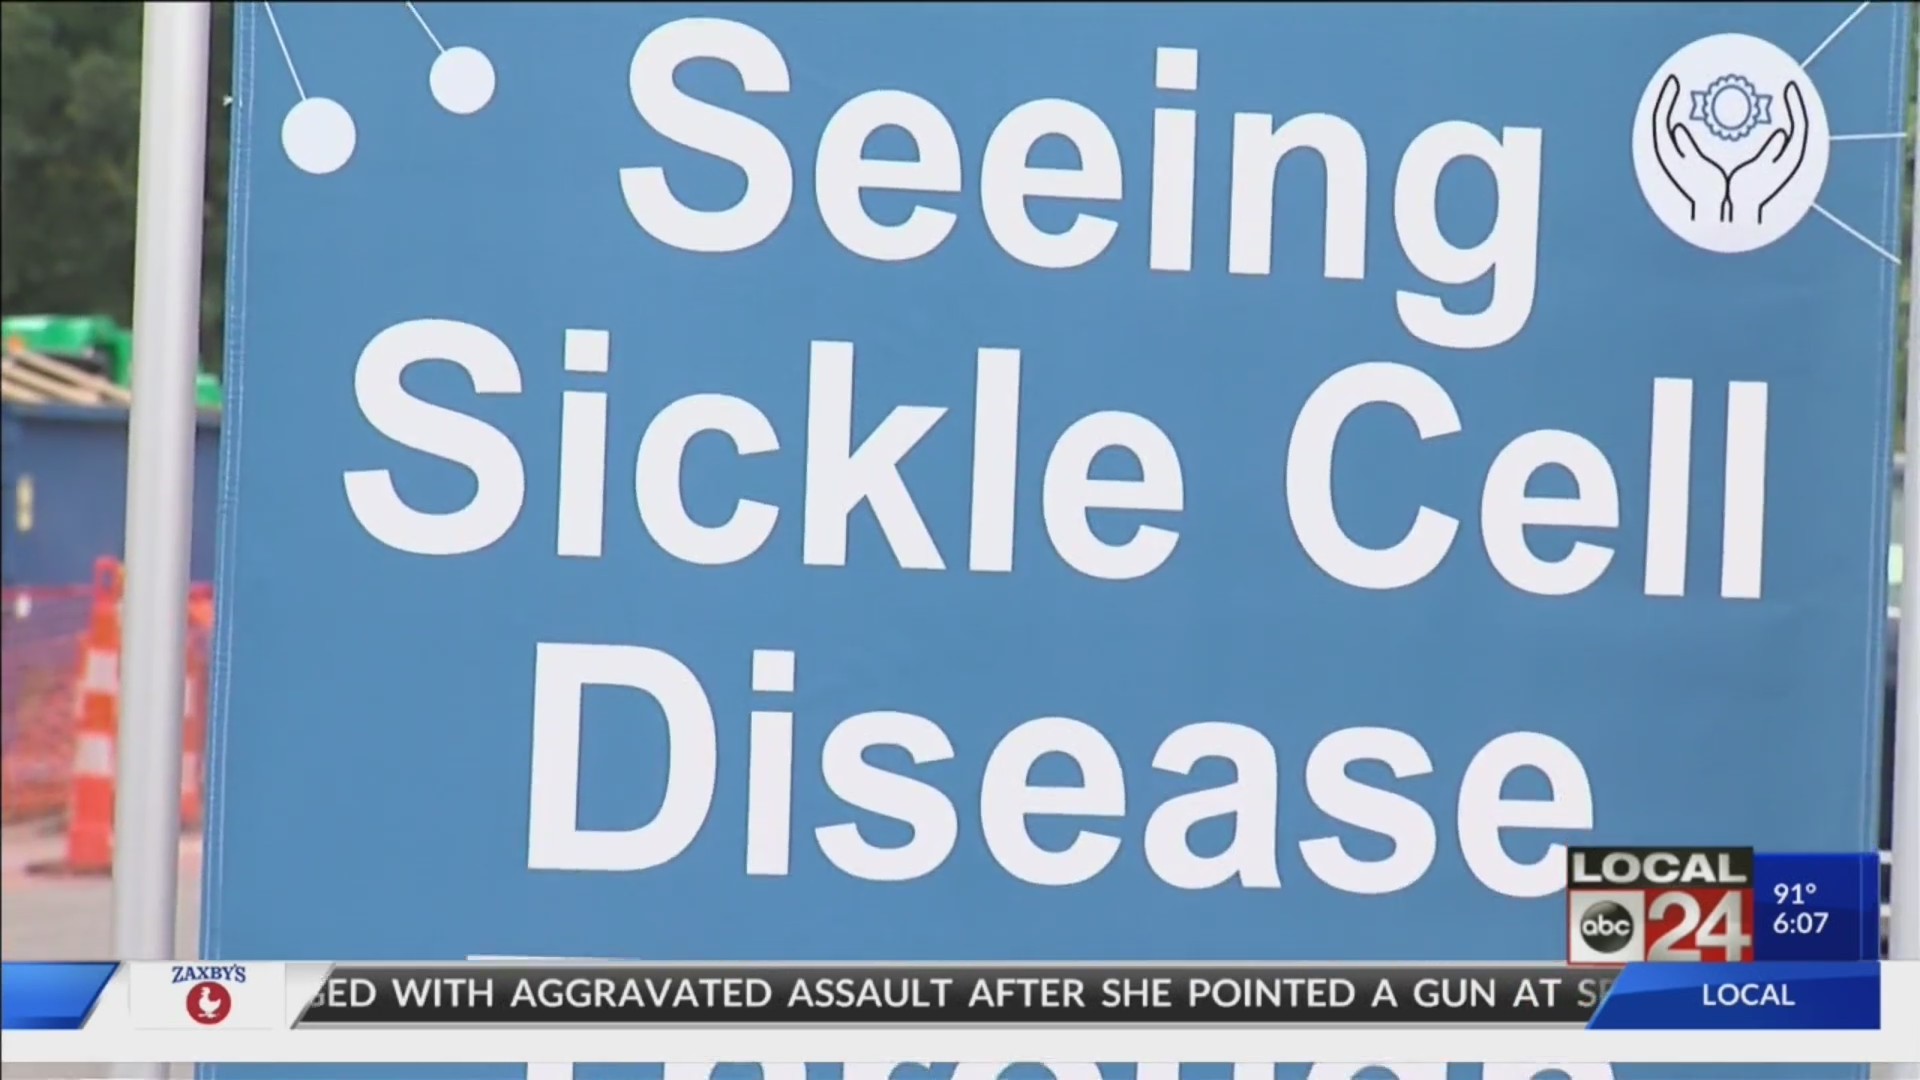 Local medical staffs get inside look at Sickle Cell patients' experiences